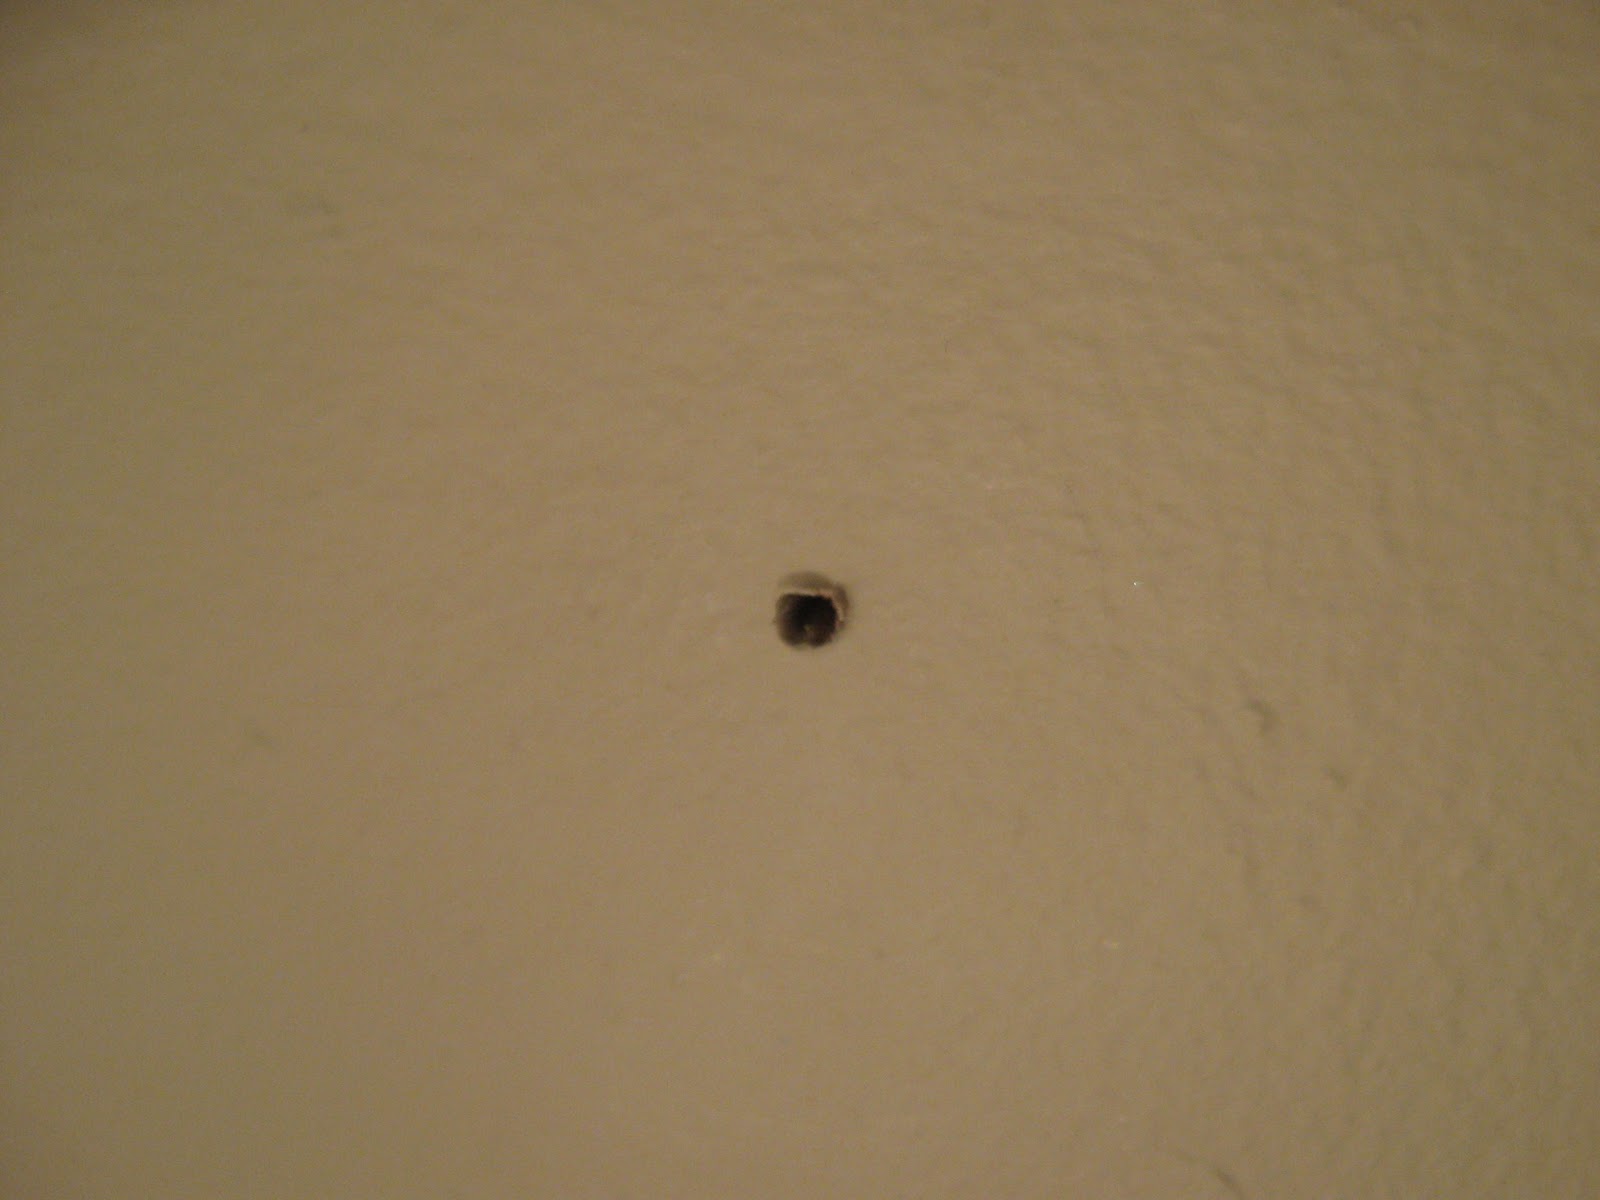 that my friend told me months ago about a quick fix for holes in walls